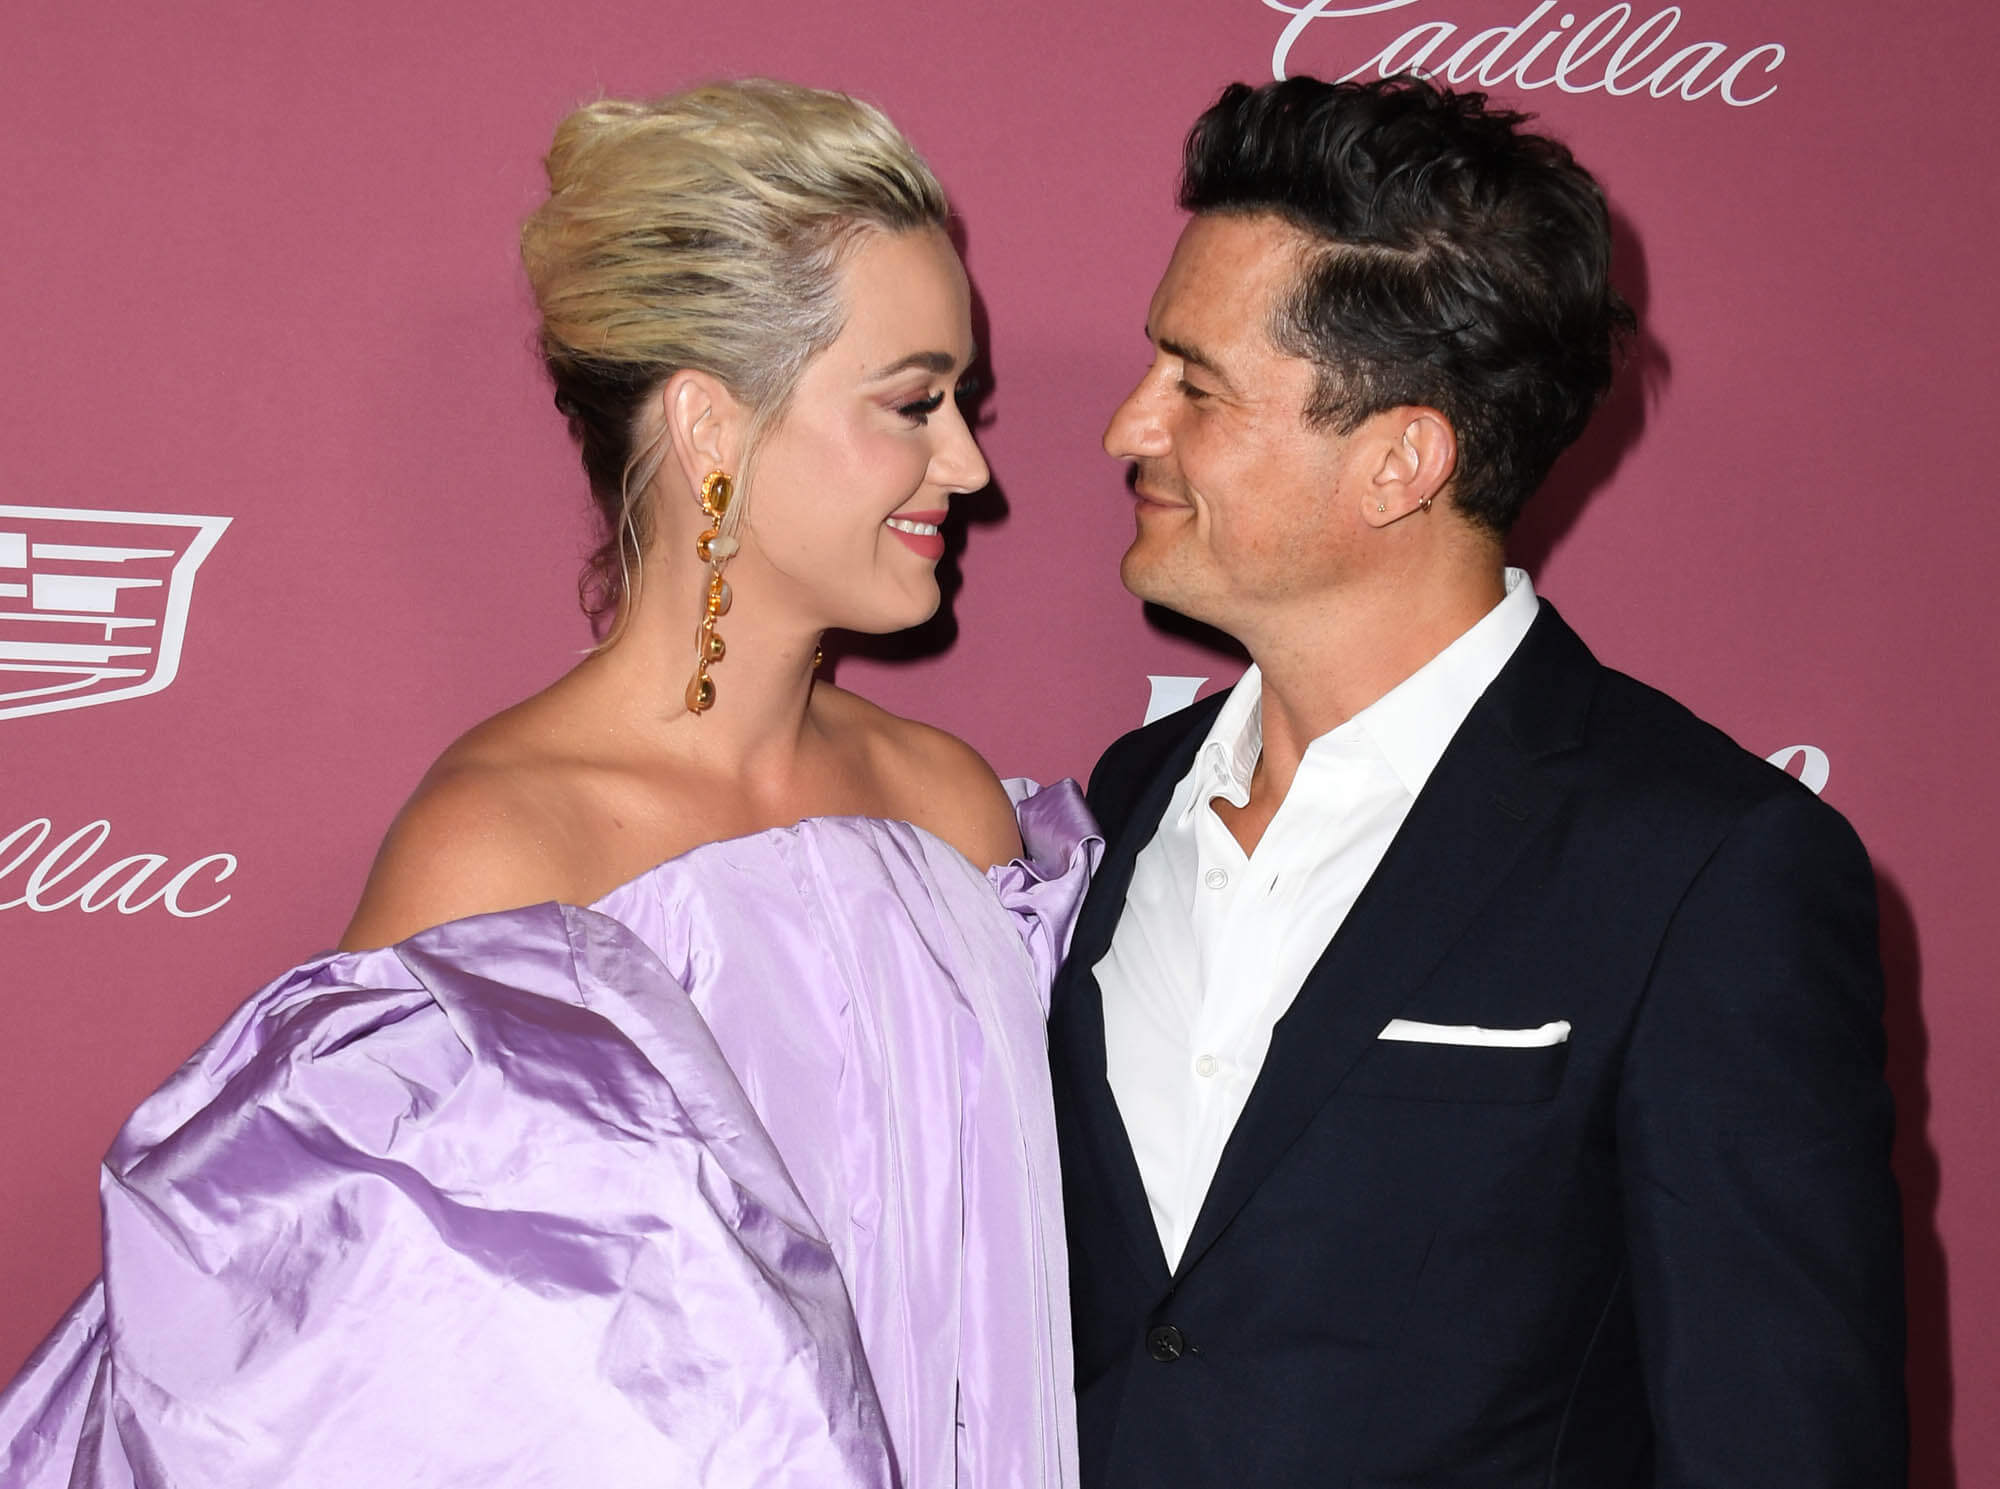 Are celebrity relationships realistic? Analyzing Katy Perry and Orlando